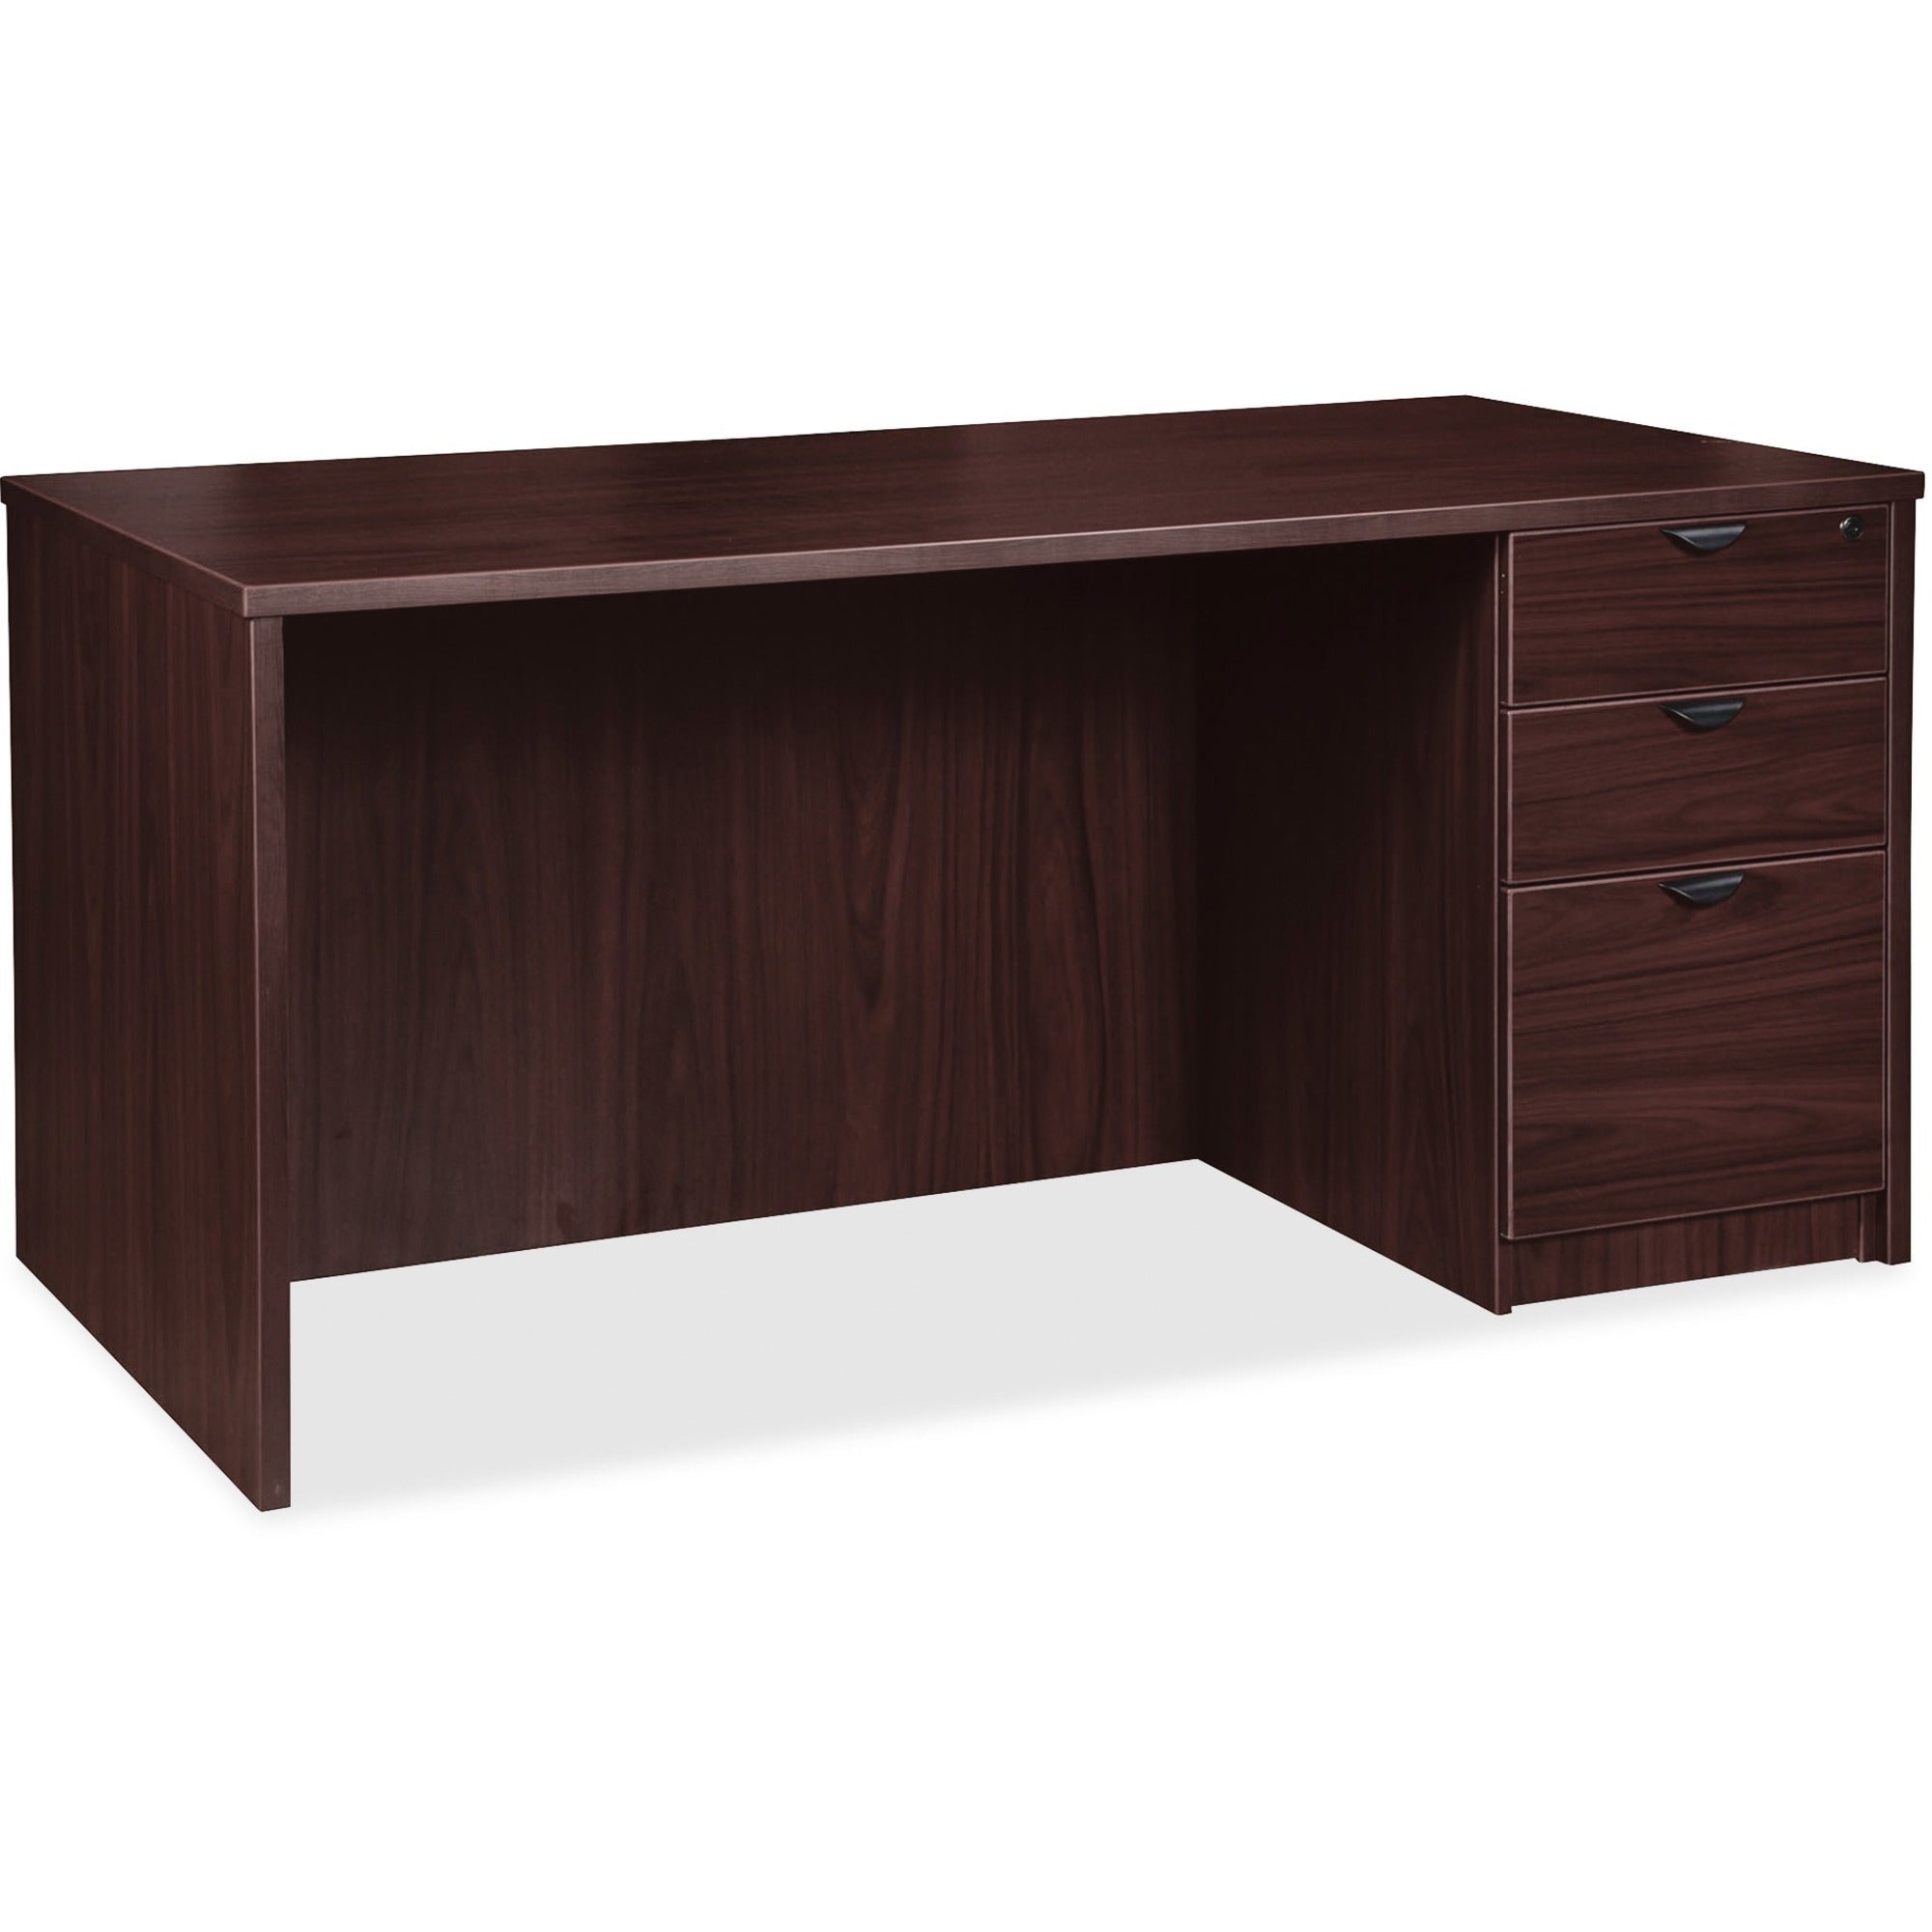 lorell-prominence-20-right-pedestal-desk-1-top-72-x-3629-3-x-file-box-drawers-single-pedestal-on-right-side-band-edge-material-particleboard-finish-espresso-laminate-thermofused-melamine-tfm_llrpd3672rspes - 1